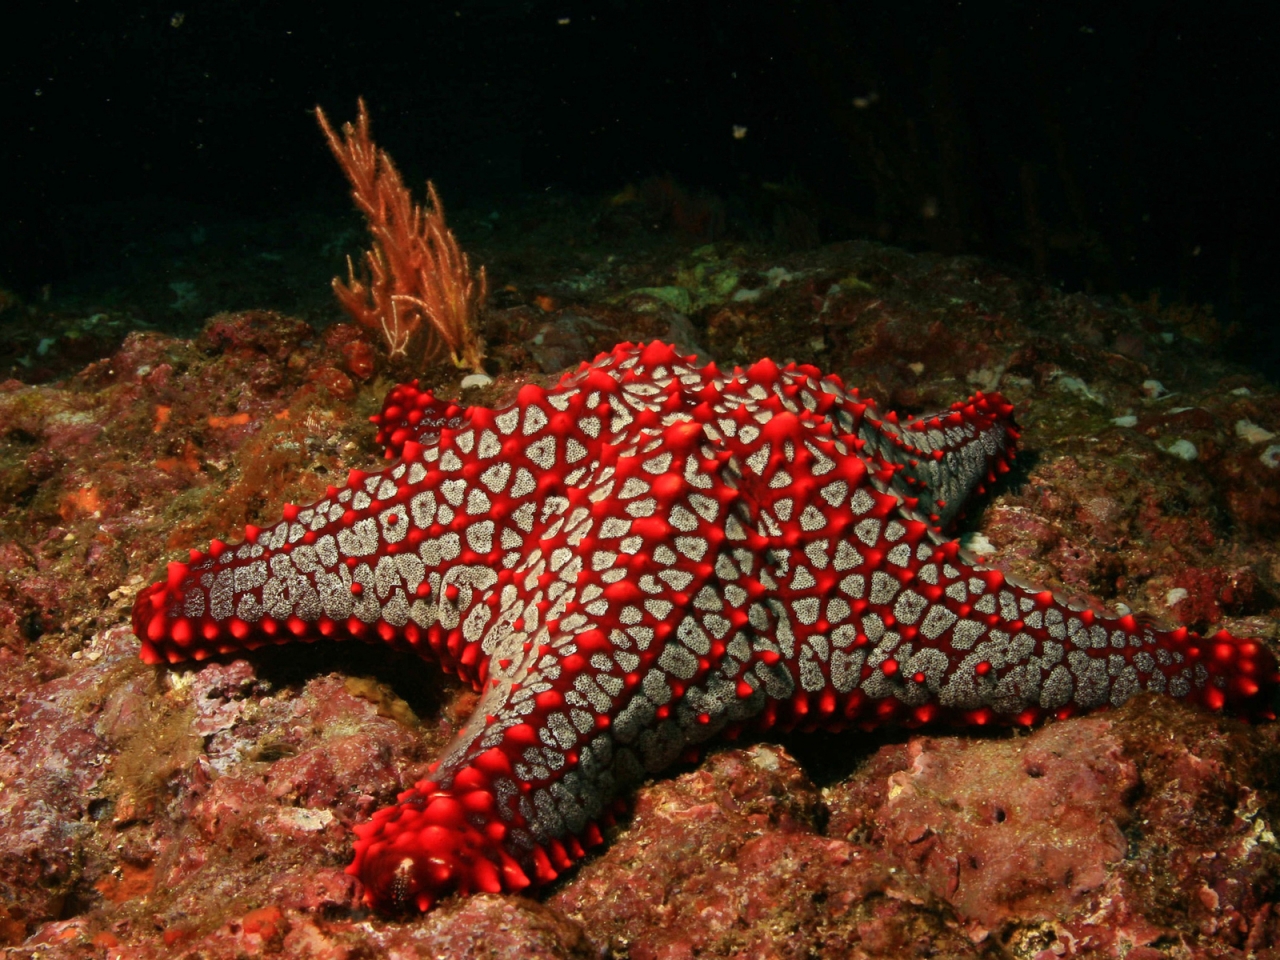 Red Sea Star for 1280 x 960 resolution